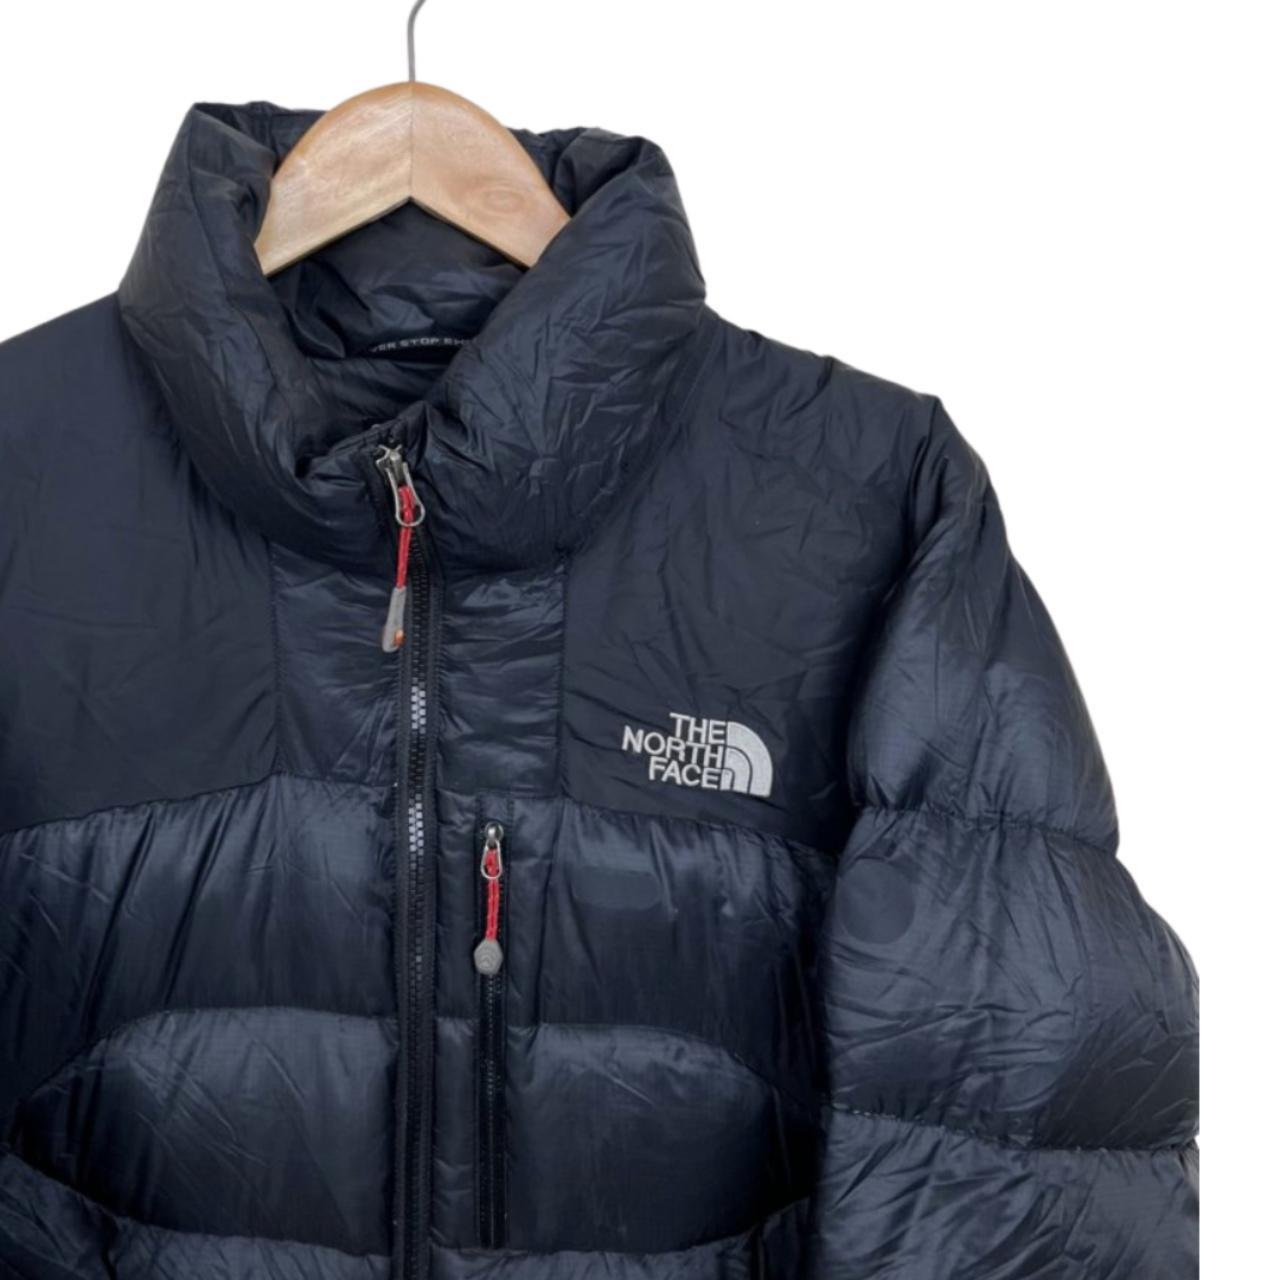 Vintage THE NORTH FACE Summit Series 800 Puffer Jacket 